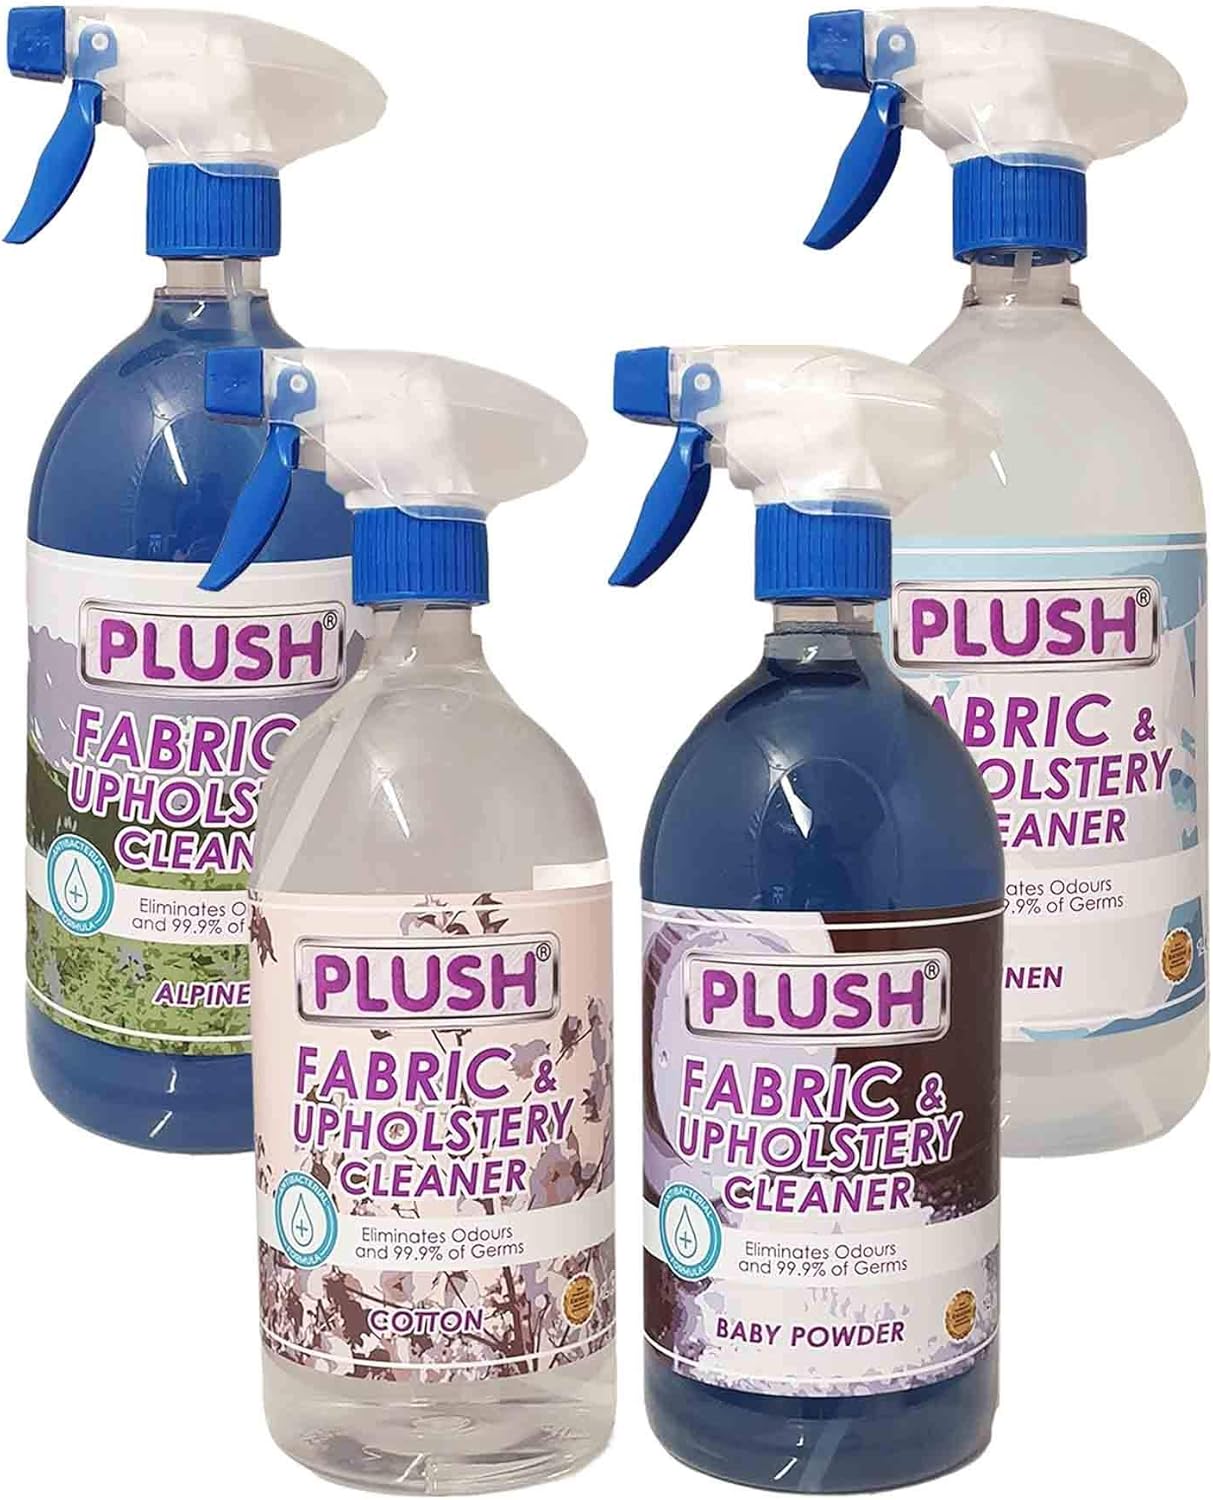 Plush Fabric & Upholstery Cleaner - Ready to Spray Spot Treatment (1L) (Alpine)